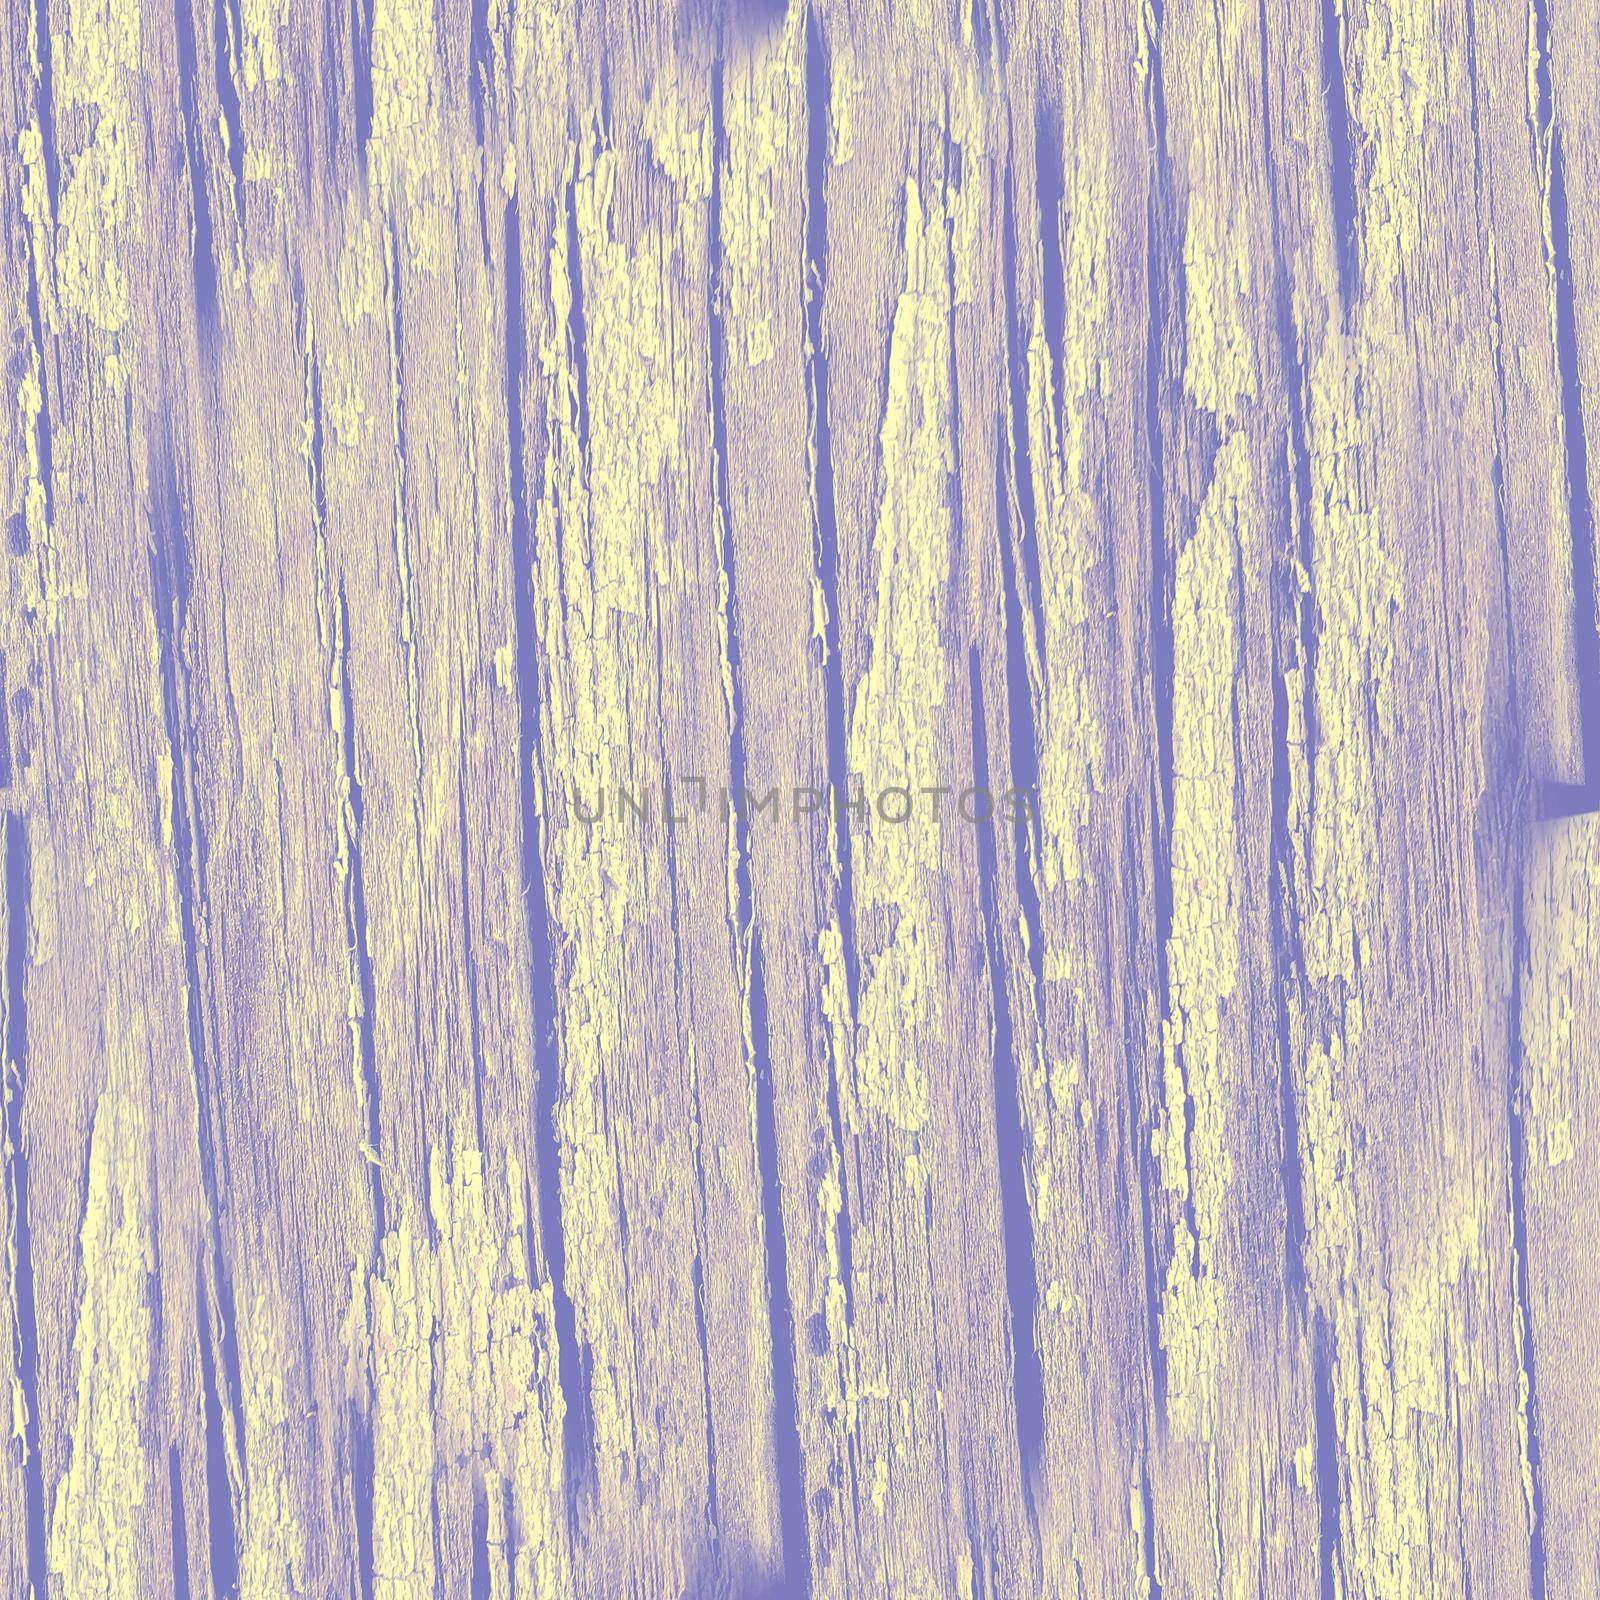 Yellow Dry Cracked Fence. Worn Crack Wallpaper. Grungy Rough Stencil. Cracked Fence. Break Nature Wooden Structure. Damaged Scratch Wall. Purple Aged Texture. Seamless Cracked Fence.